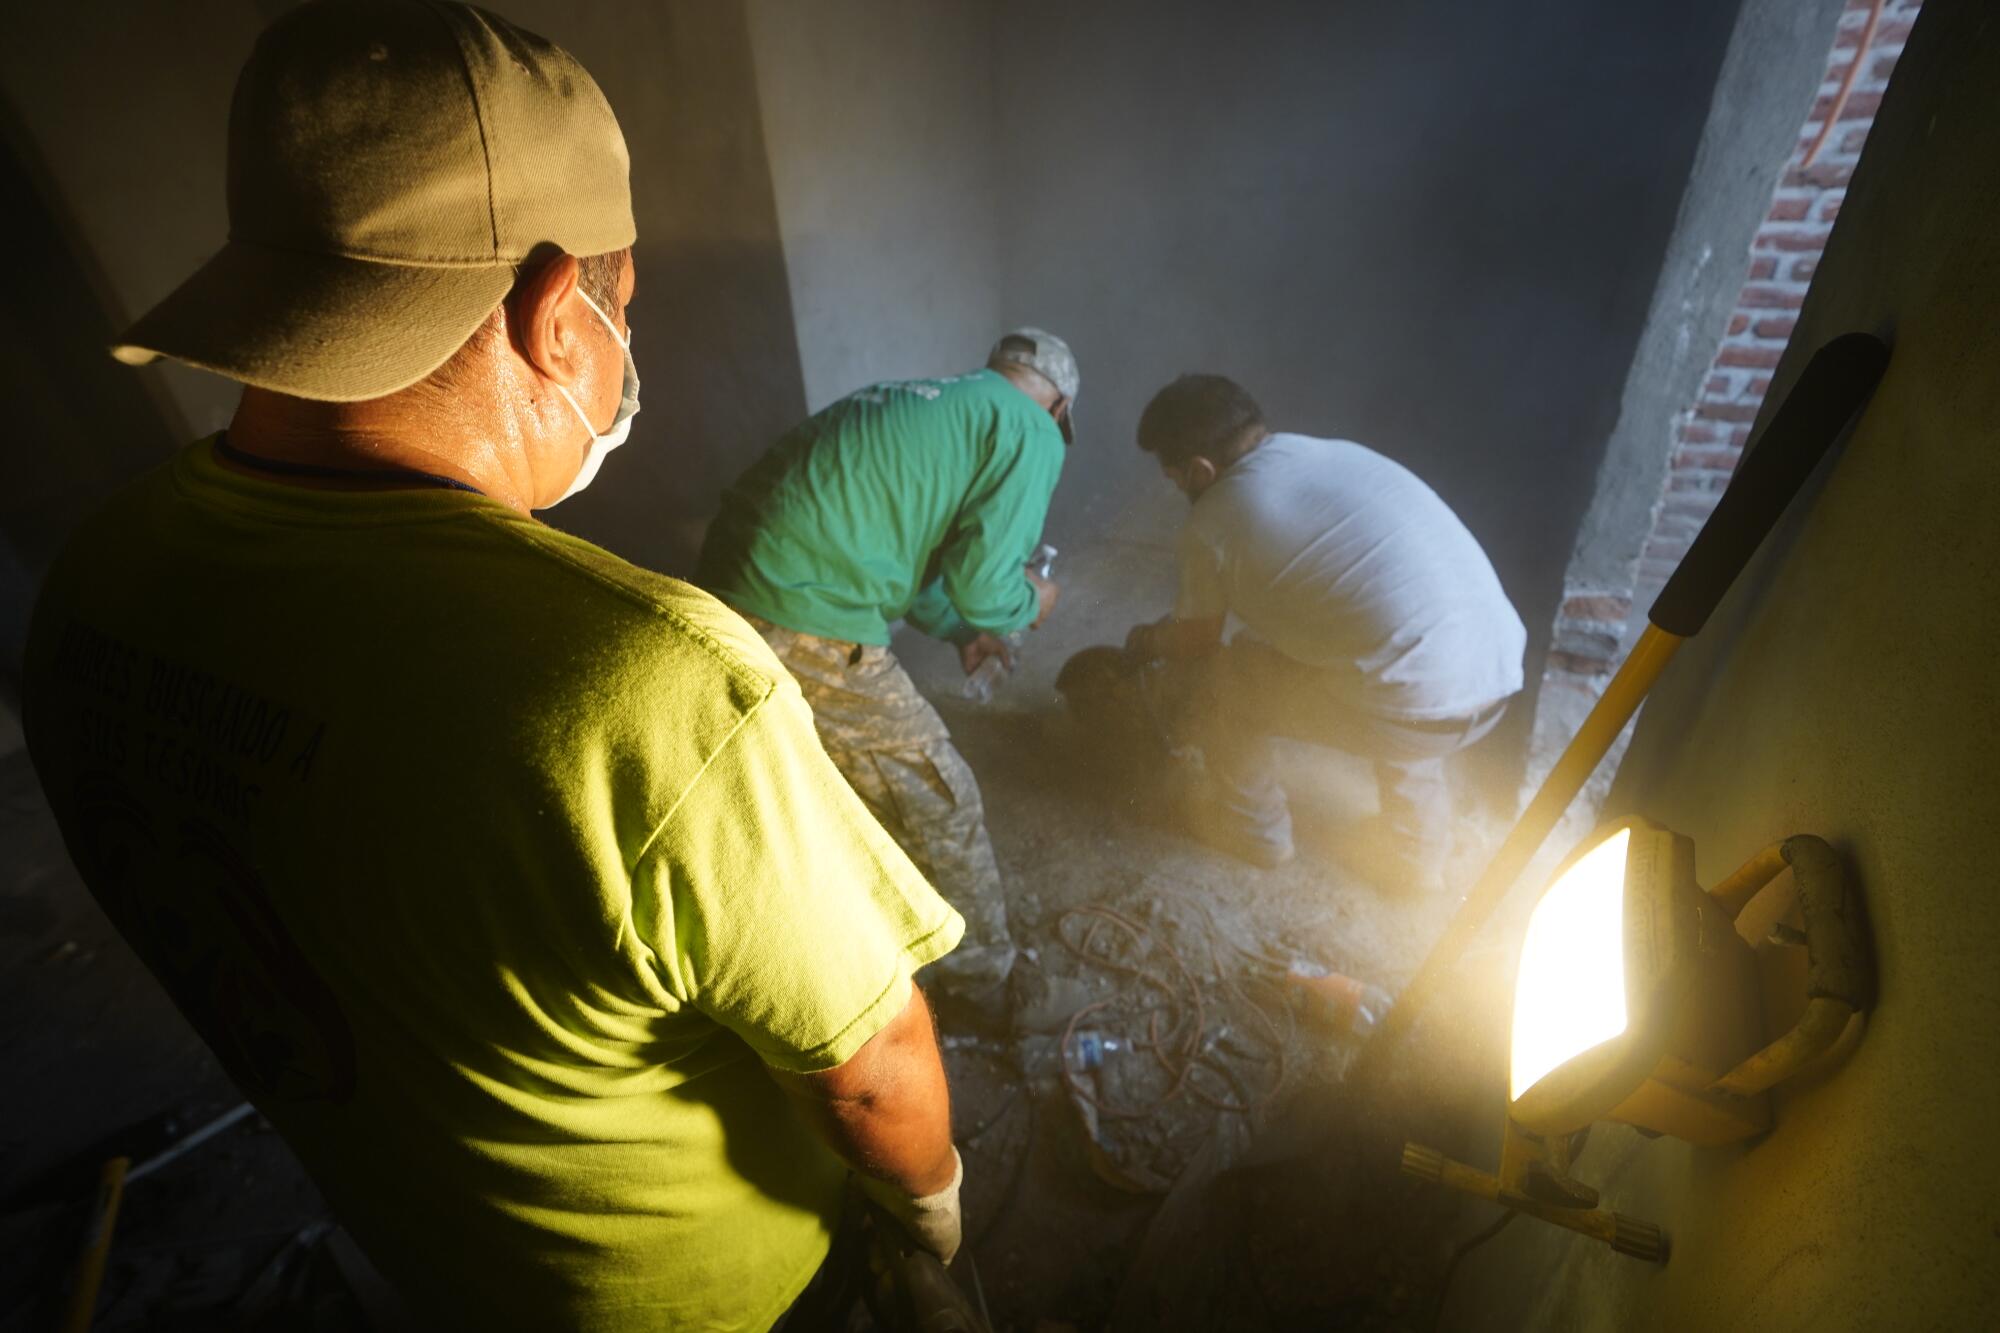 Jesus Varajas Chairez pours water as a volunteer cuts through a concrete floor with a saw.